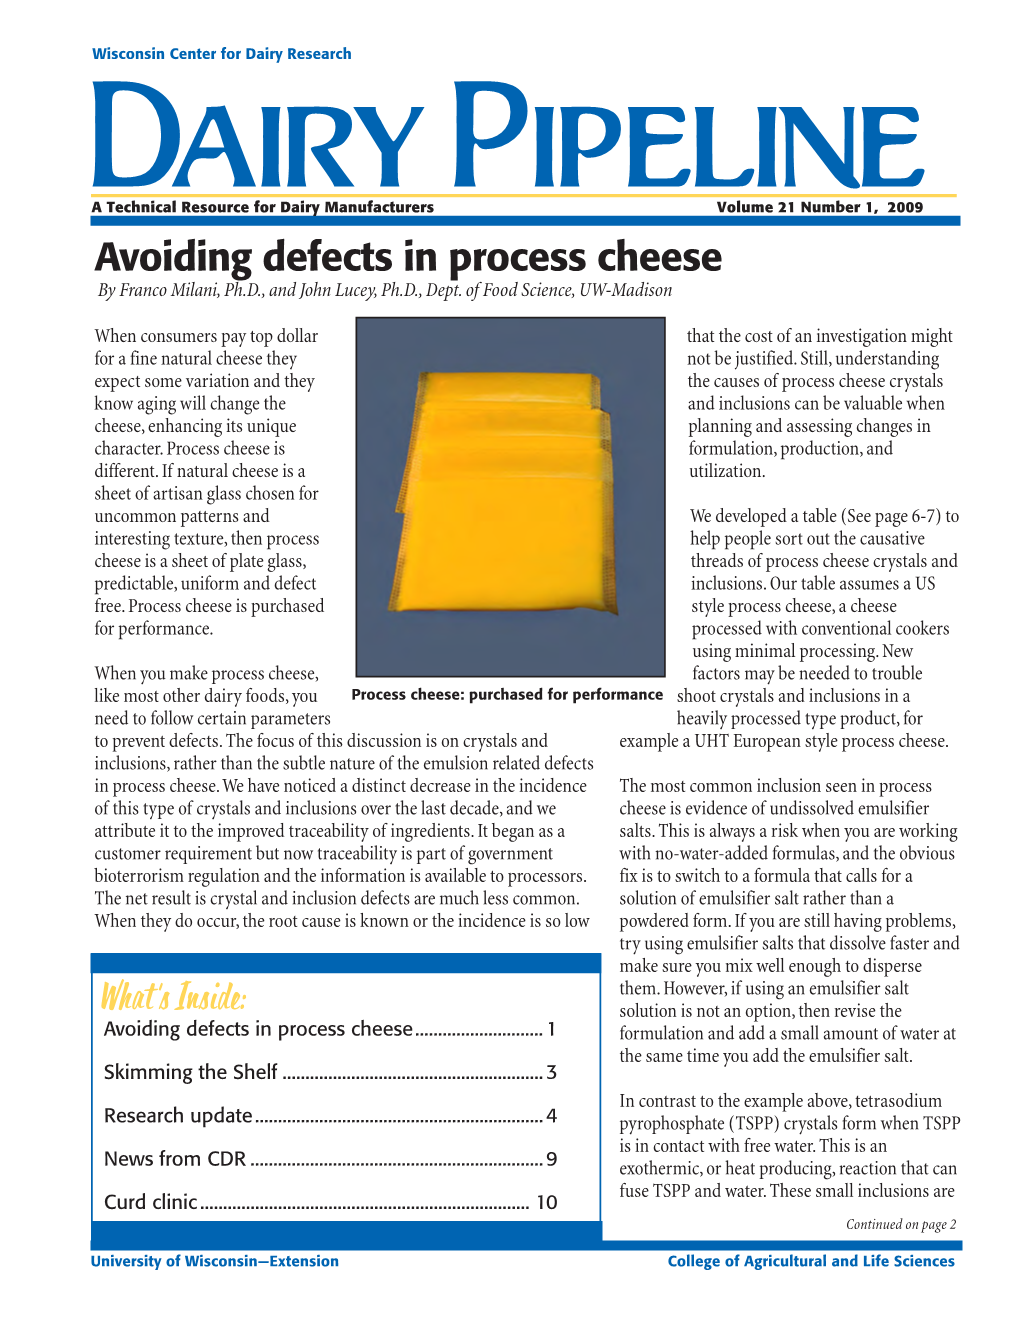 Avoiding Defects in Process Cheese by Franco Milani, Ph.D., and John Lucey, Ph.D., Dept